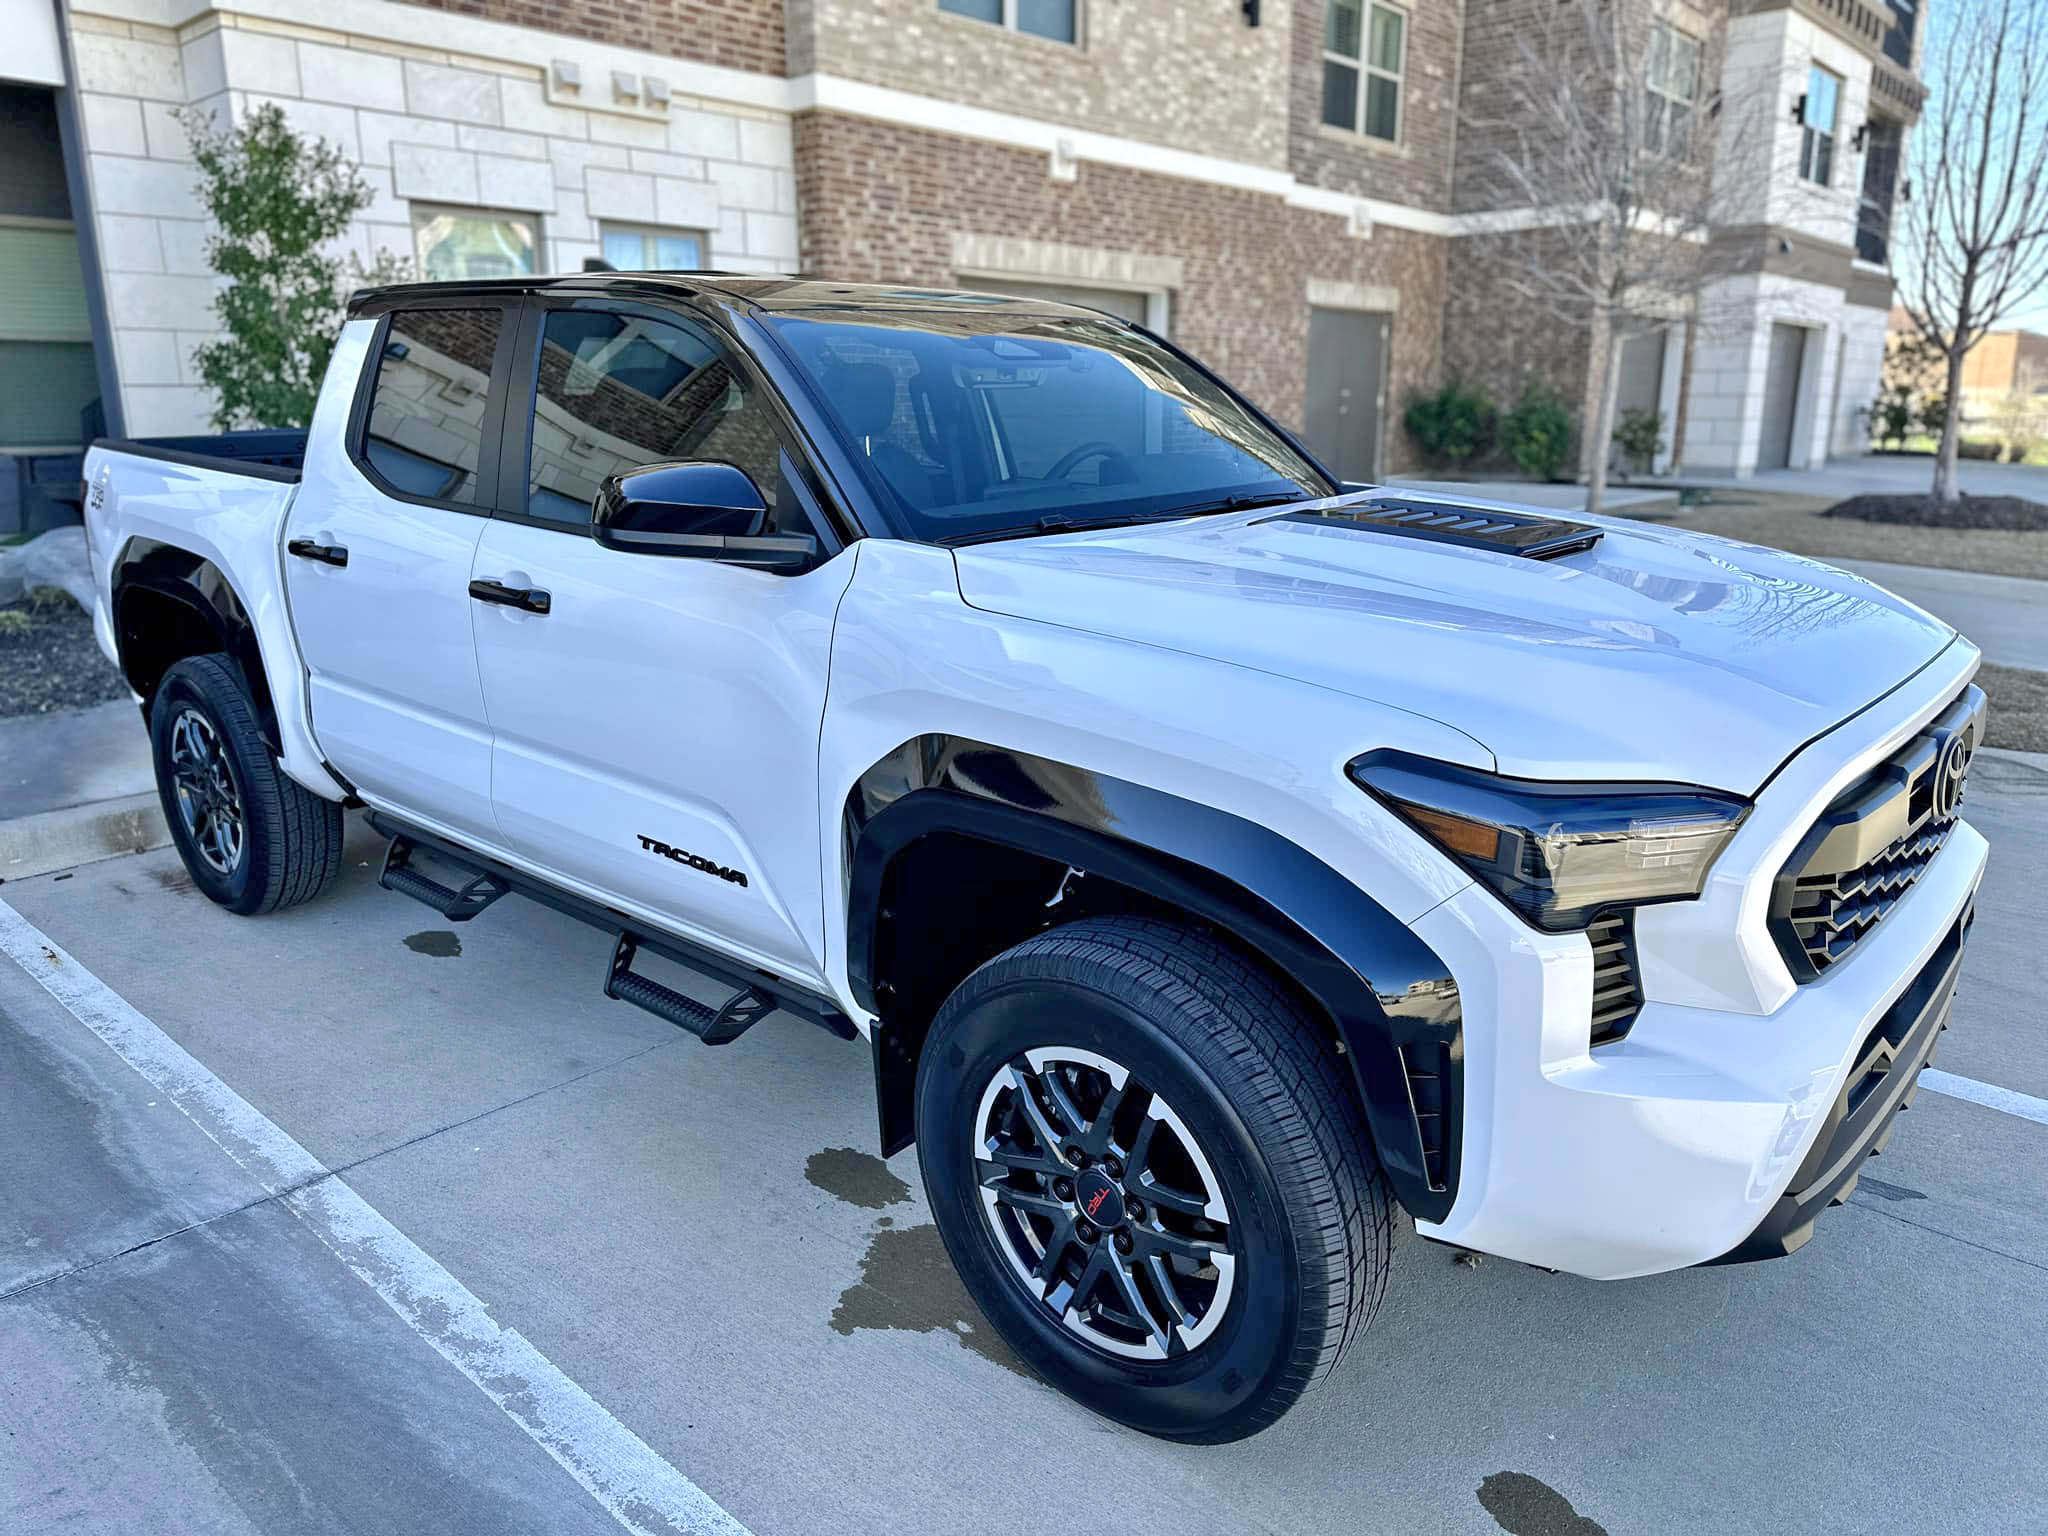 2024 Tacoma Gloss black wrap roof, fender flares and mirrors for a 2024 TRD PRO look Roof Wrap + Fender Flare Wrapped in Black for a 2024 TRD PRO look 1